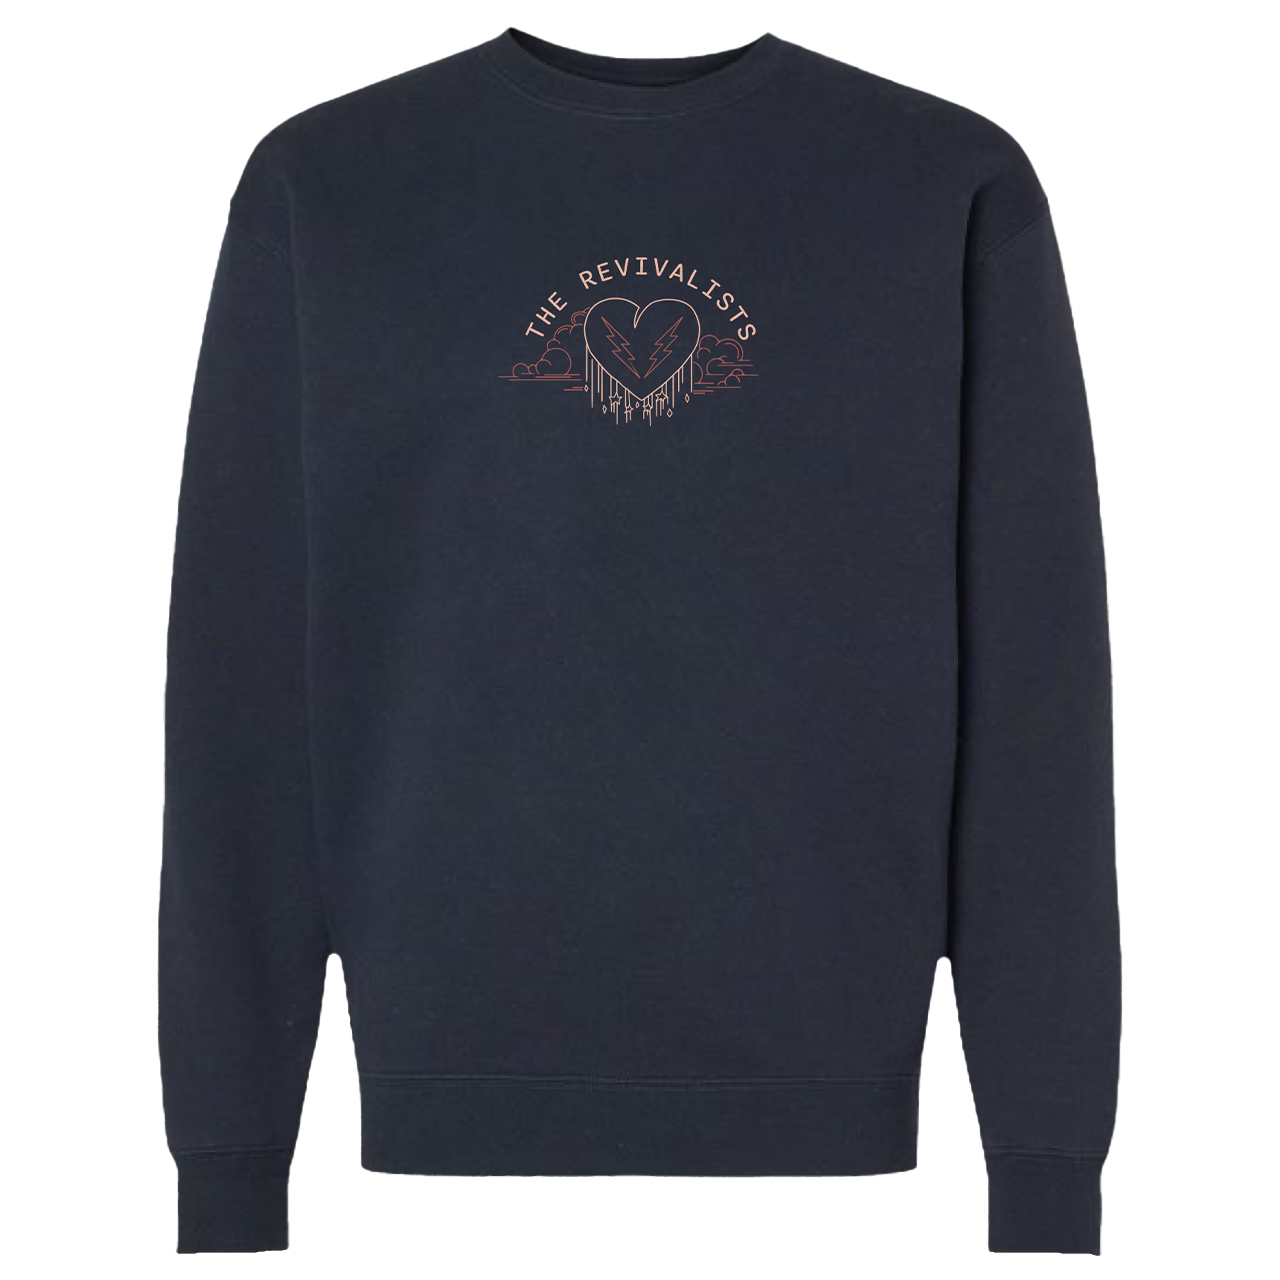 Lightning in Your Heart Crewneck